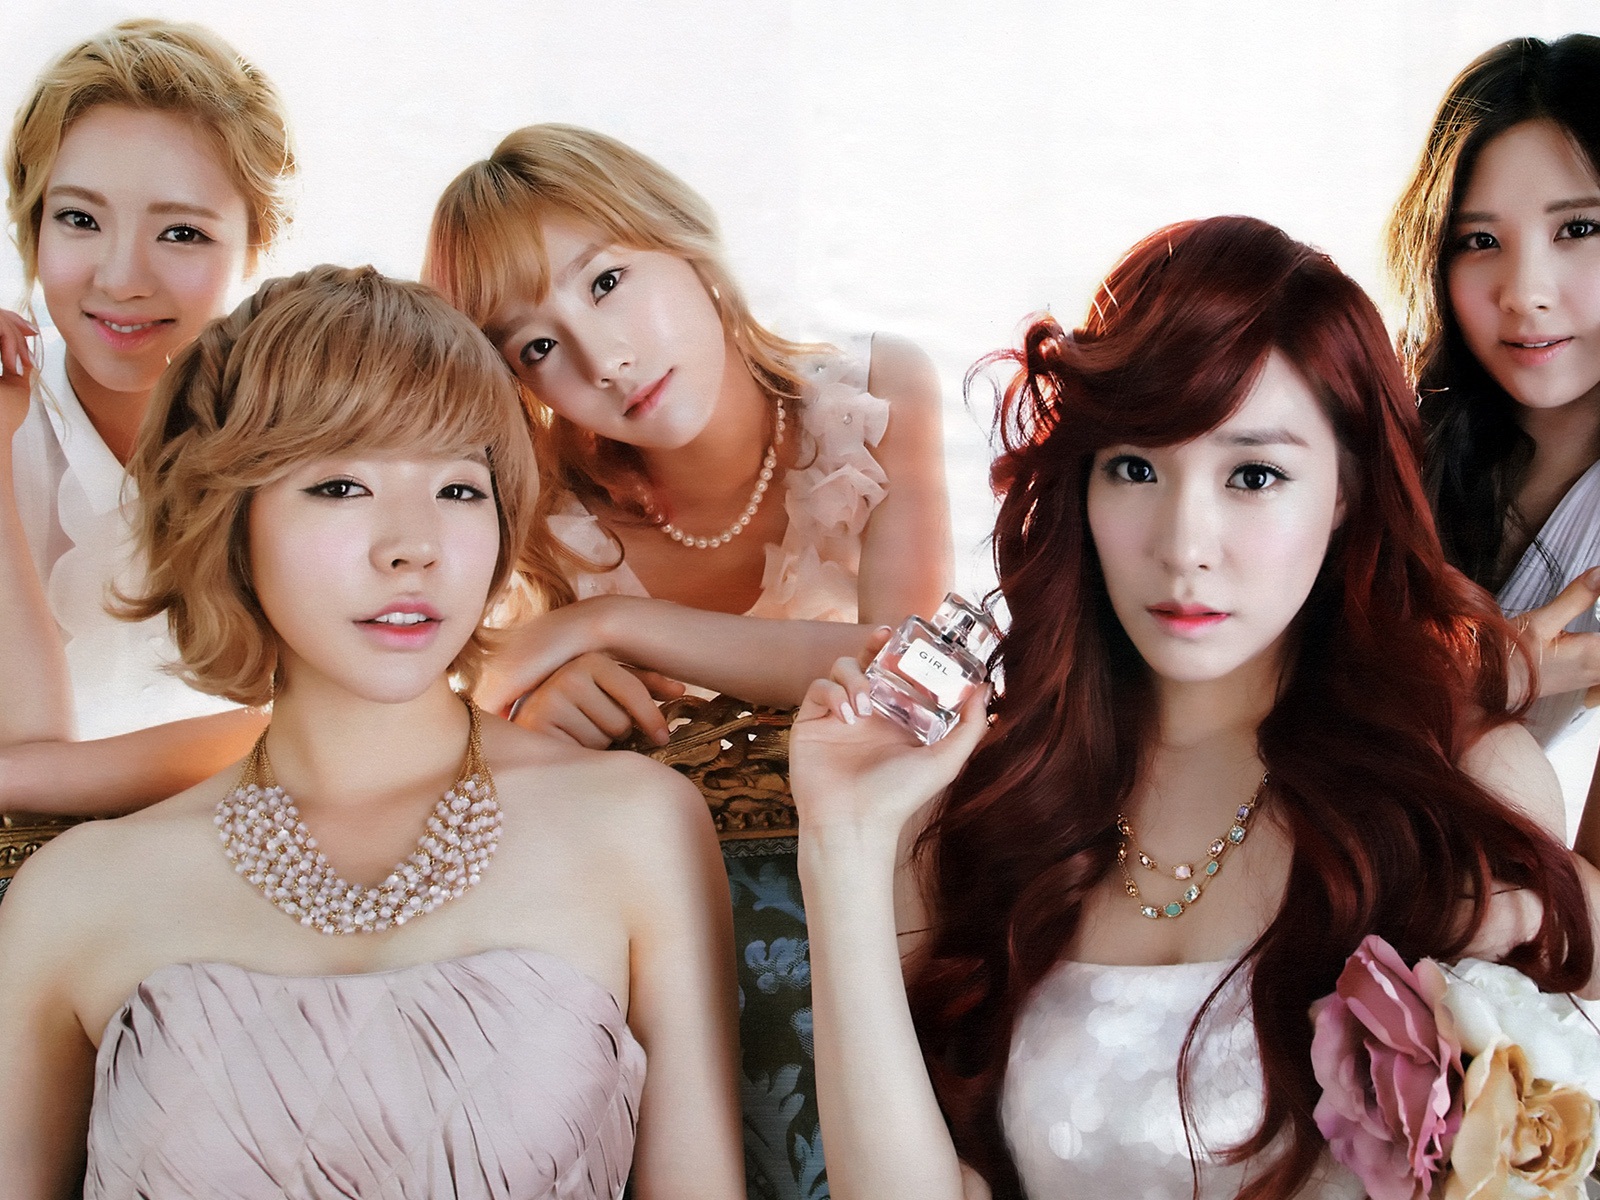 Girls Generation latest HD wallpapers collection #4 - 1600x1200